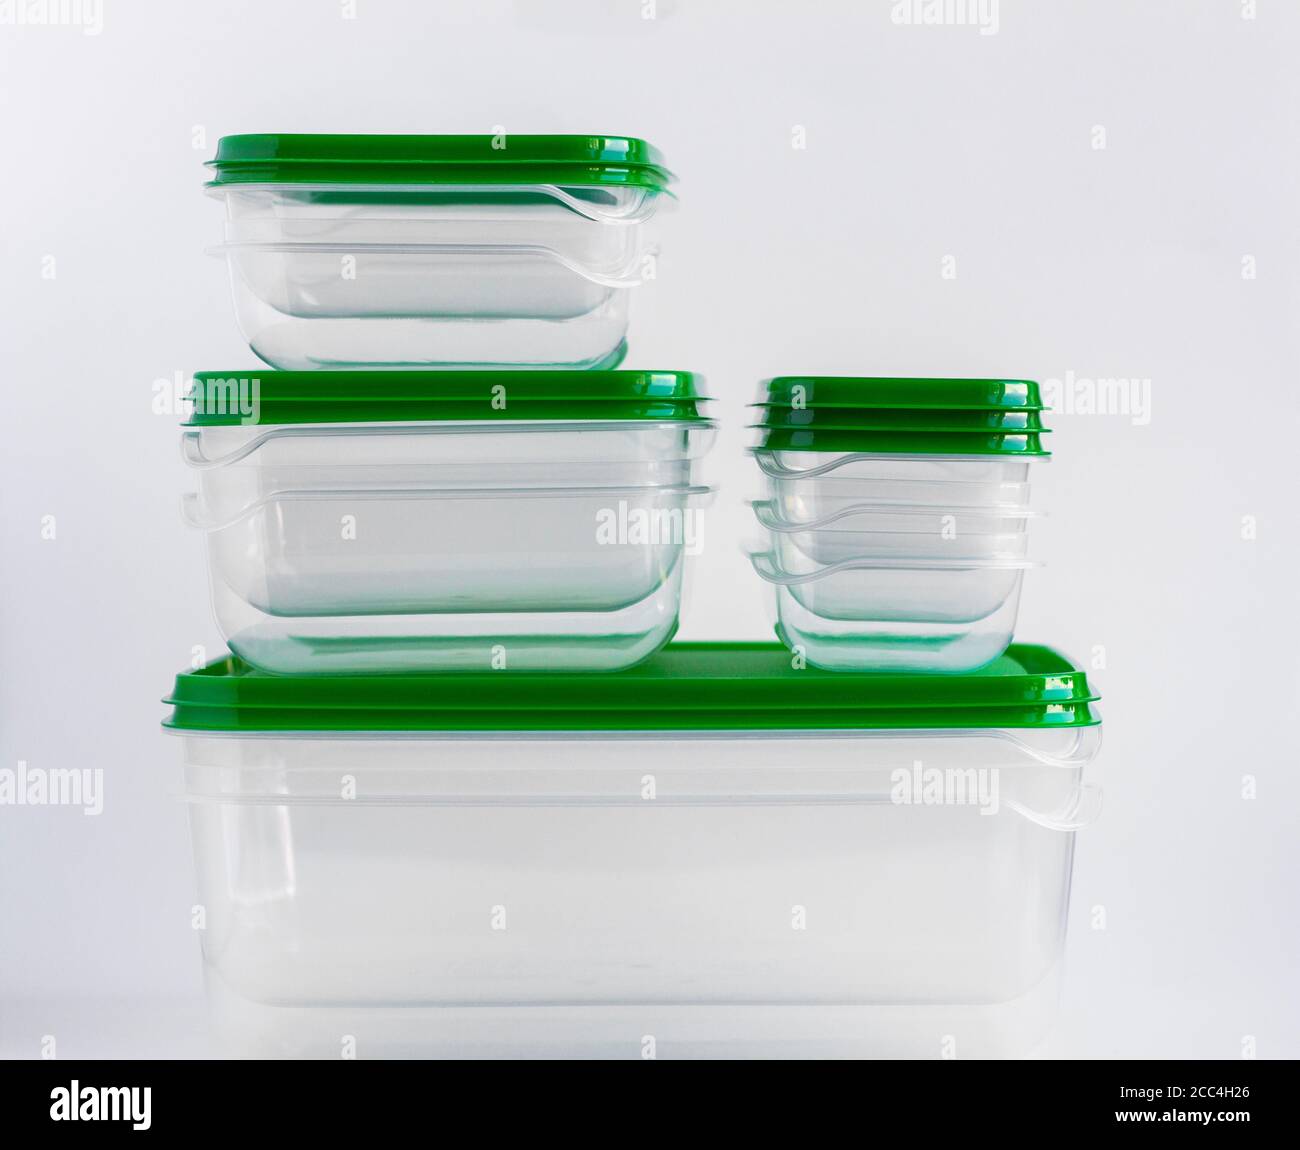 https://c8.alamy.com/comp/2CC4H26/empty-plastic-food-containers-are-stacked-on-a-white-background-2CC4H26.jpg